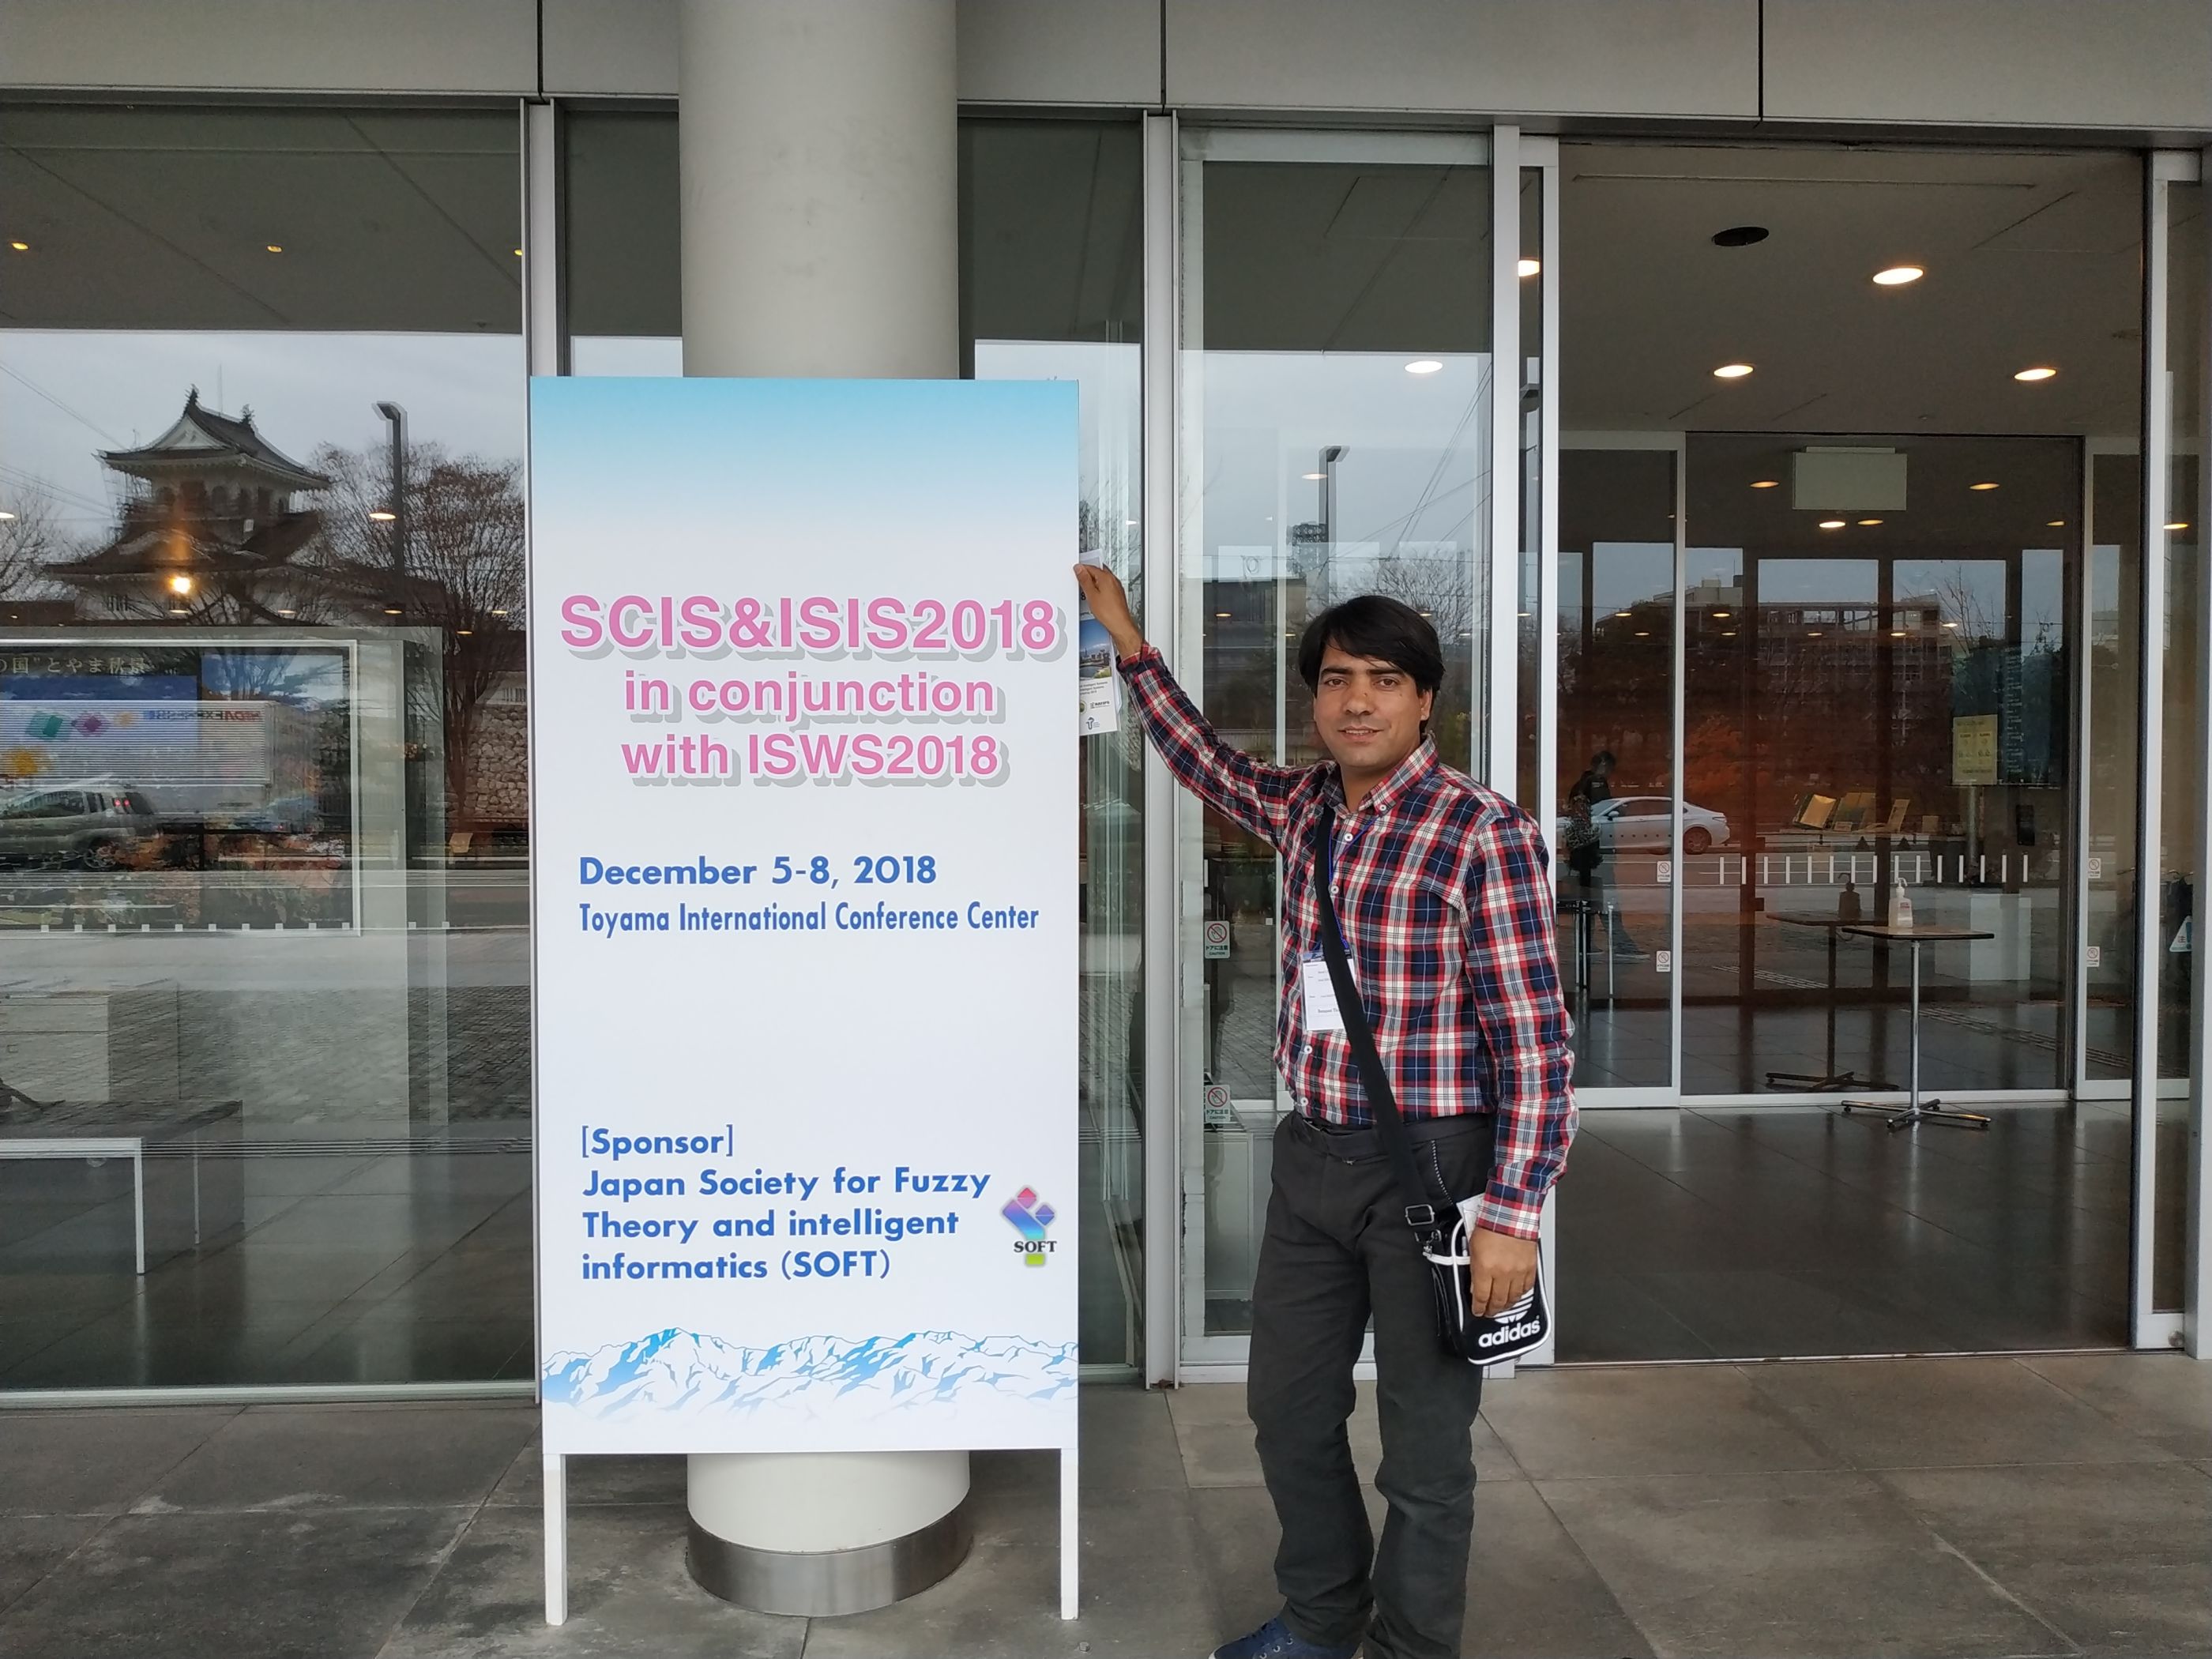 Dr. Rehman Ali posing for a  photo prior to start of joint 10th International Conference on SCIS & ISIS 2018 in Toyama, Japan